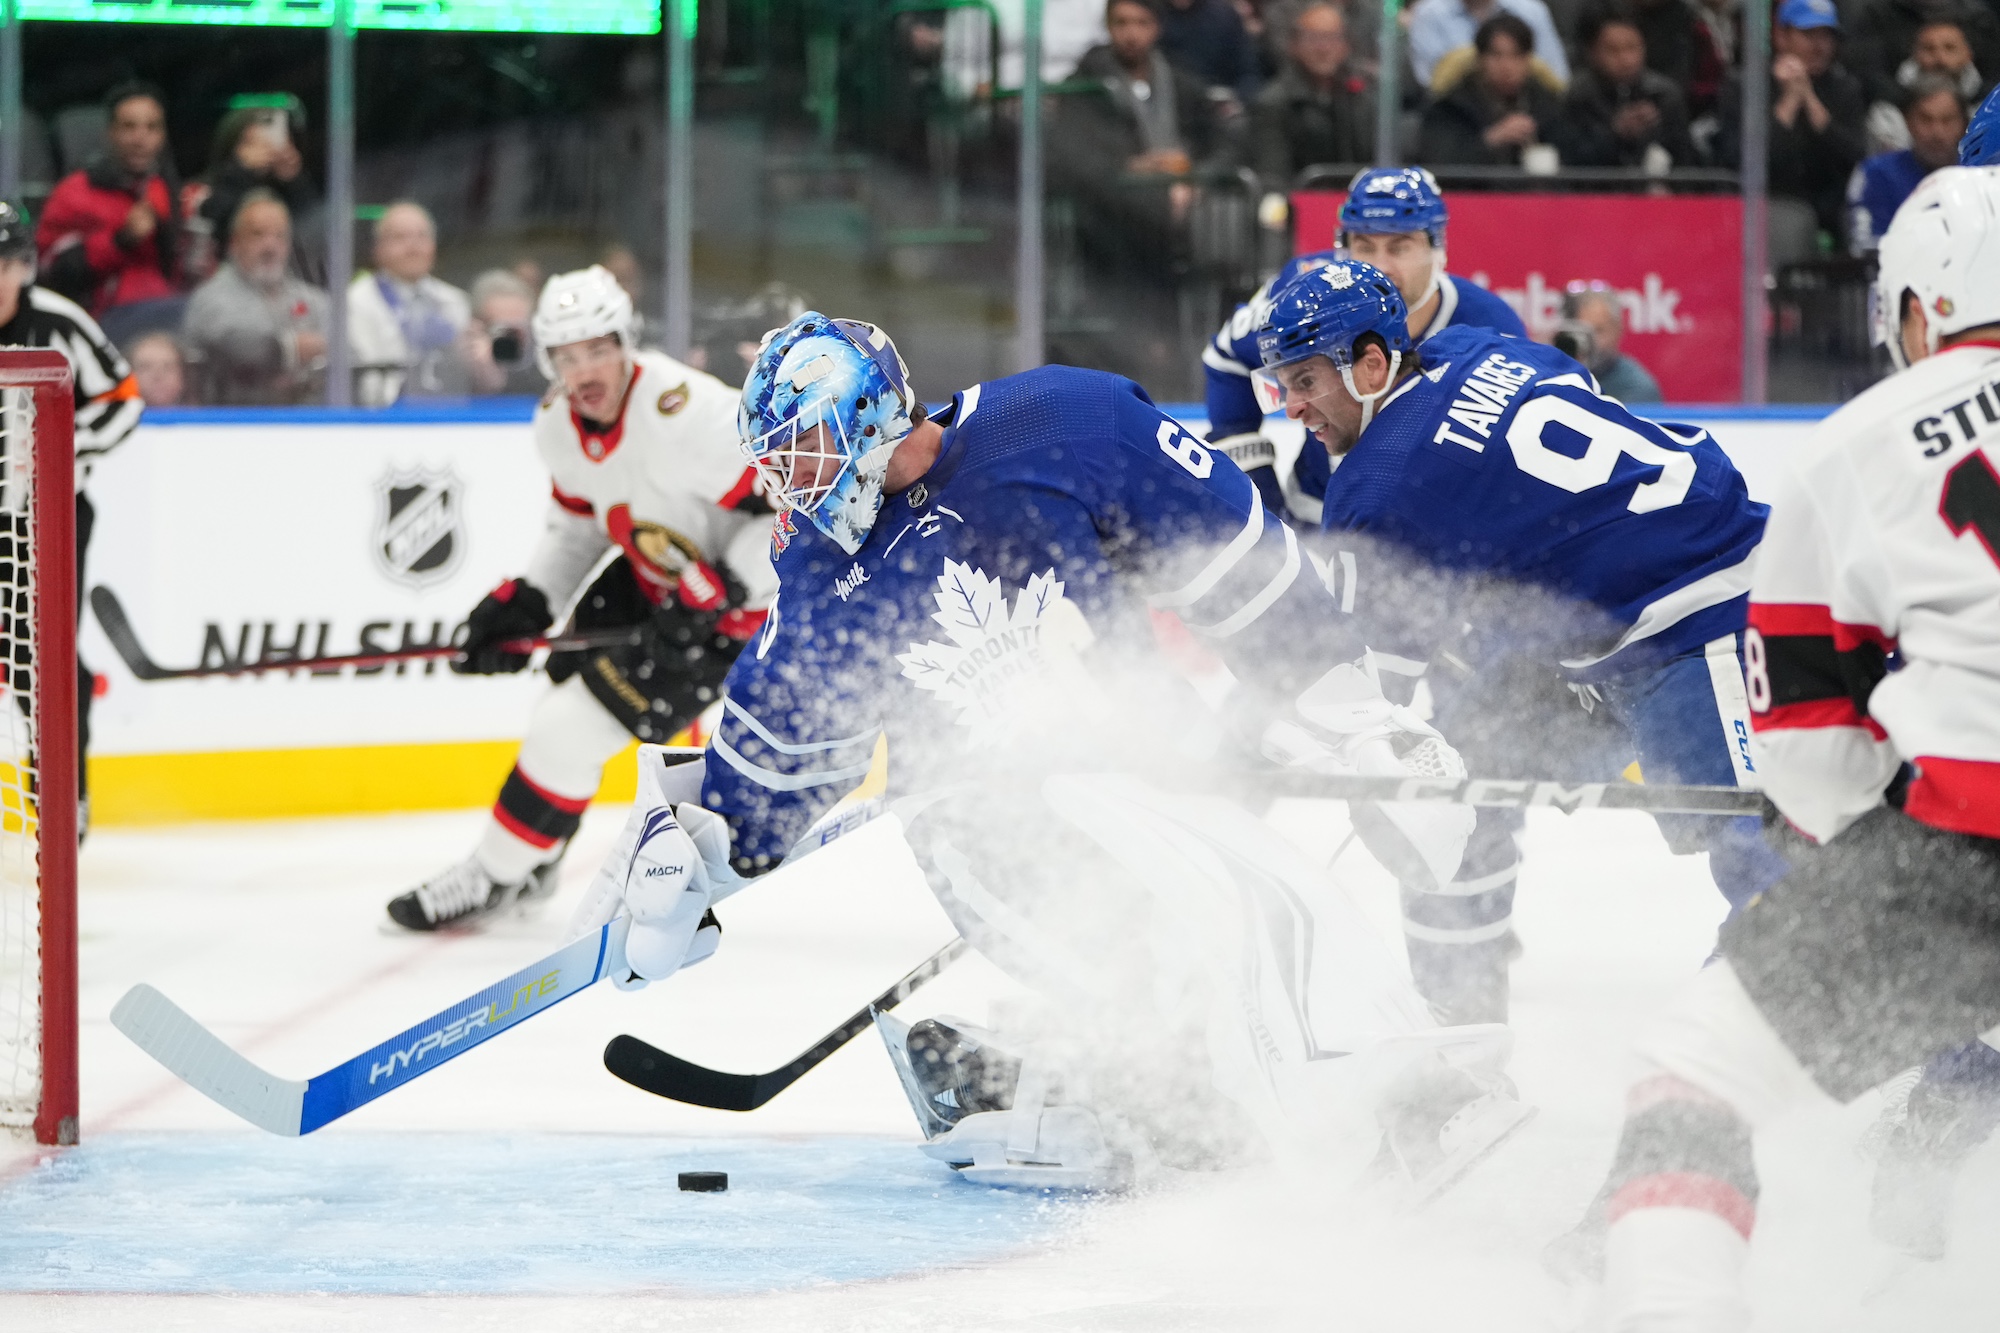 TORONTO, CANADA - NOVEMBER 8: Joseph Woll #60 of the Toronto Maple Leafs reaches for the puck against the Ottawa Senators at Scotiabank Arena on November 8, 2023 in Toronto, Ontario, Canada. (Photo by Michael Chisholm/NHLI via Getty Images)